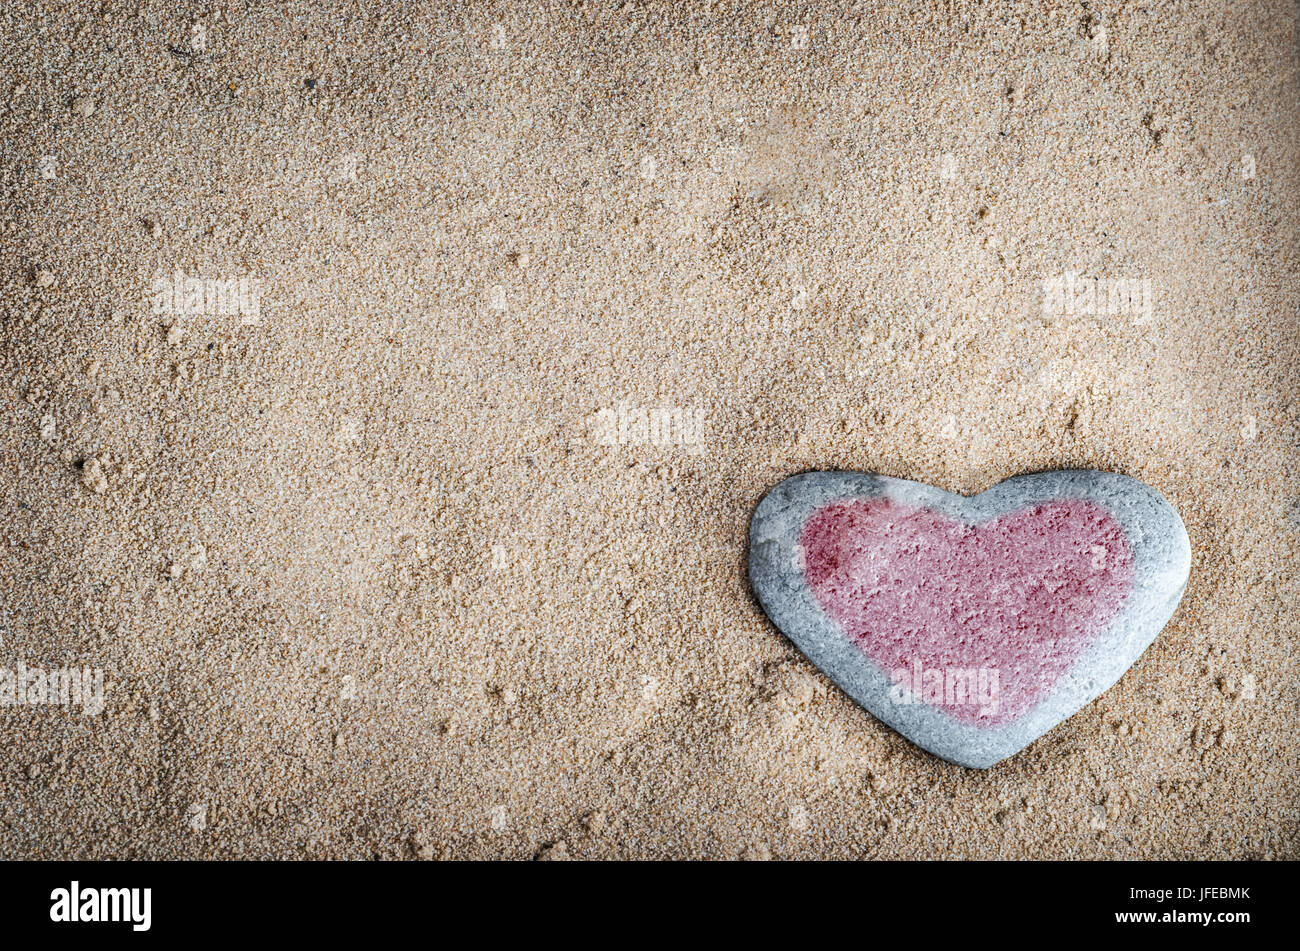 A grey heart shaped stone on grainy sand, tinted with a red heart.  This version is vignetted and edited to give a retro or lo-fi appearance. Stock Photo